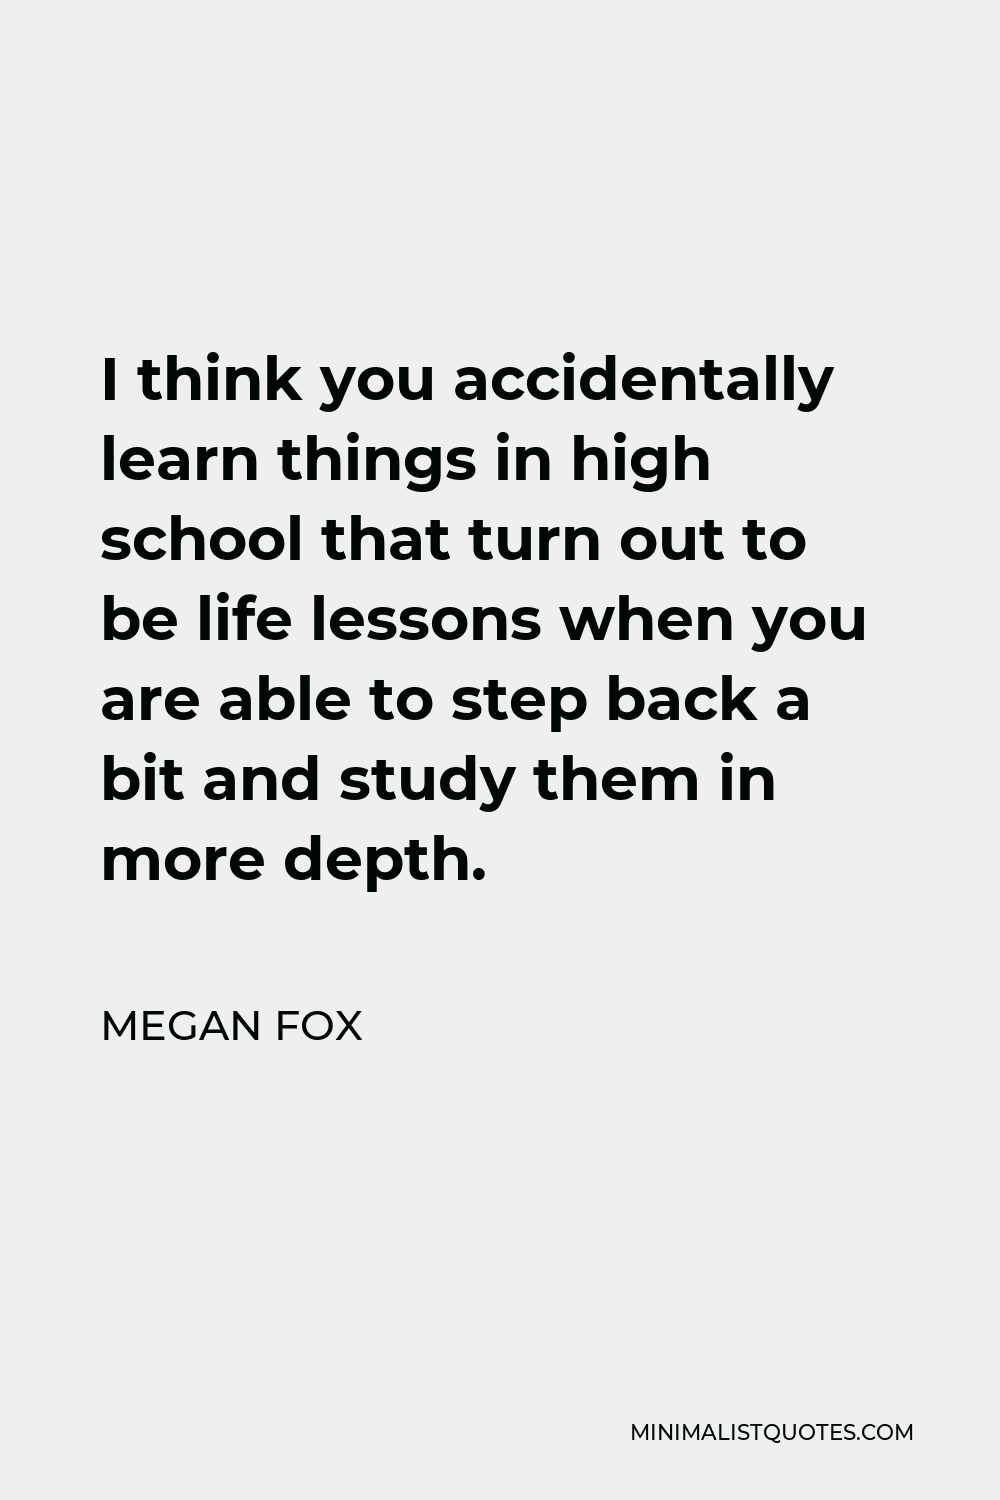 Megan Fox Quote - I think you accidentally learn things in high school that turn out to be life lessons when you are able to step back a bit and study them in more depth.